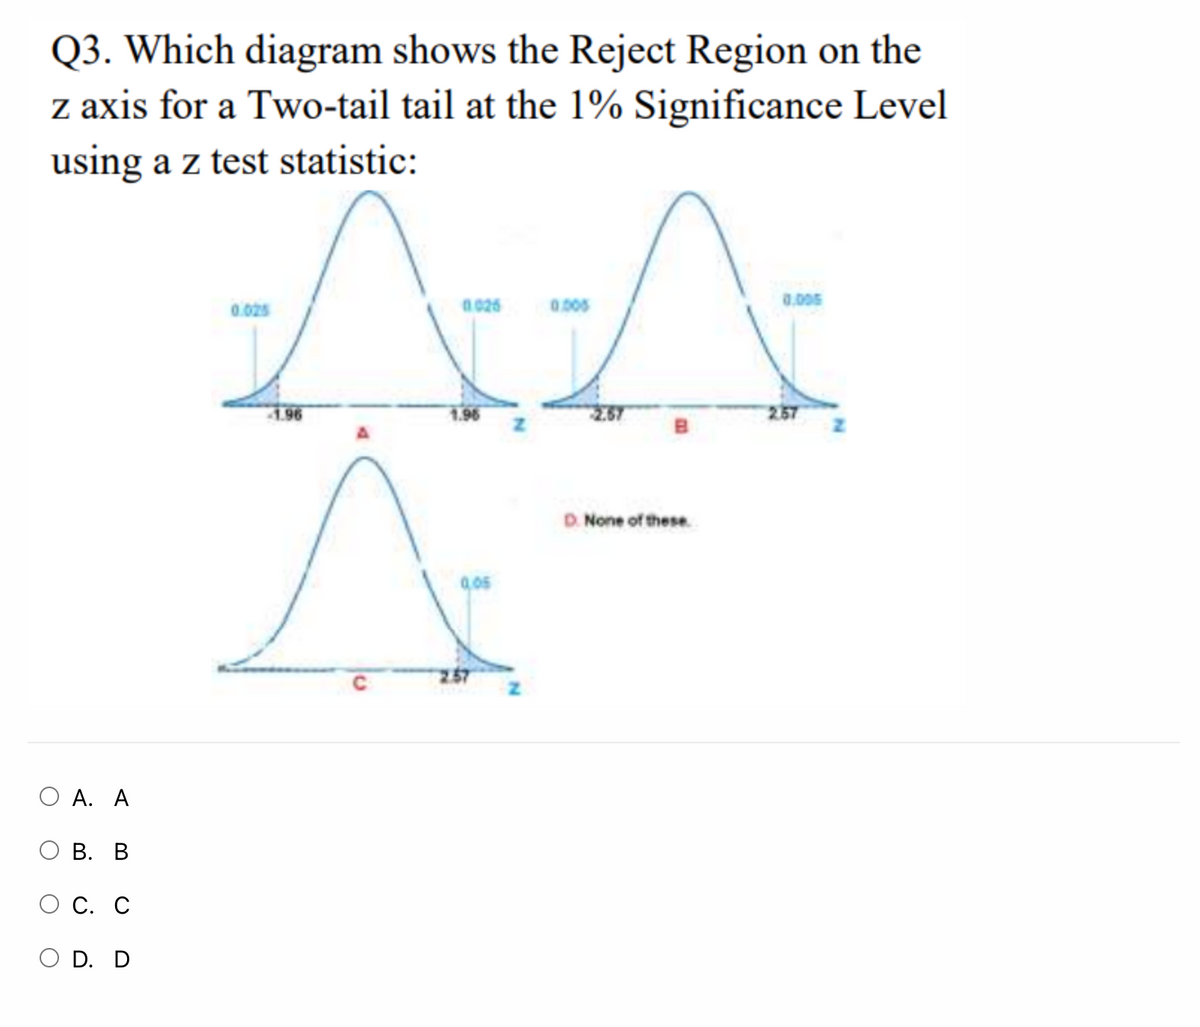 Q3. Which diagram shows the Reject Region on the
z axis for a Two-tail tail at the 1% Significance Level
using a z test statistic:
0.005
0.025
a 026
0.005
1.96
1.96
257
D. None of these.
O A. A
В. В
О С. С
O D. D
